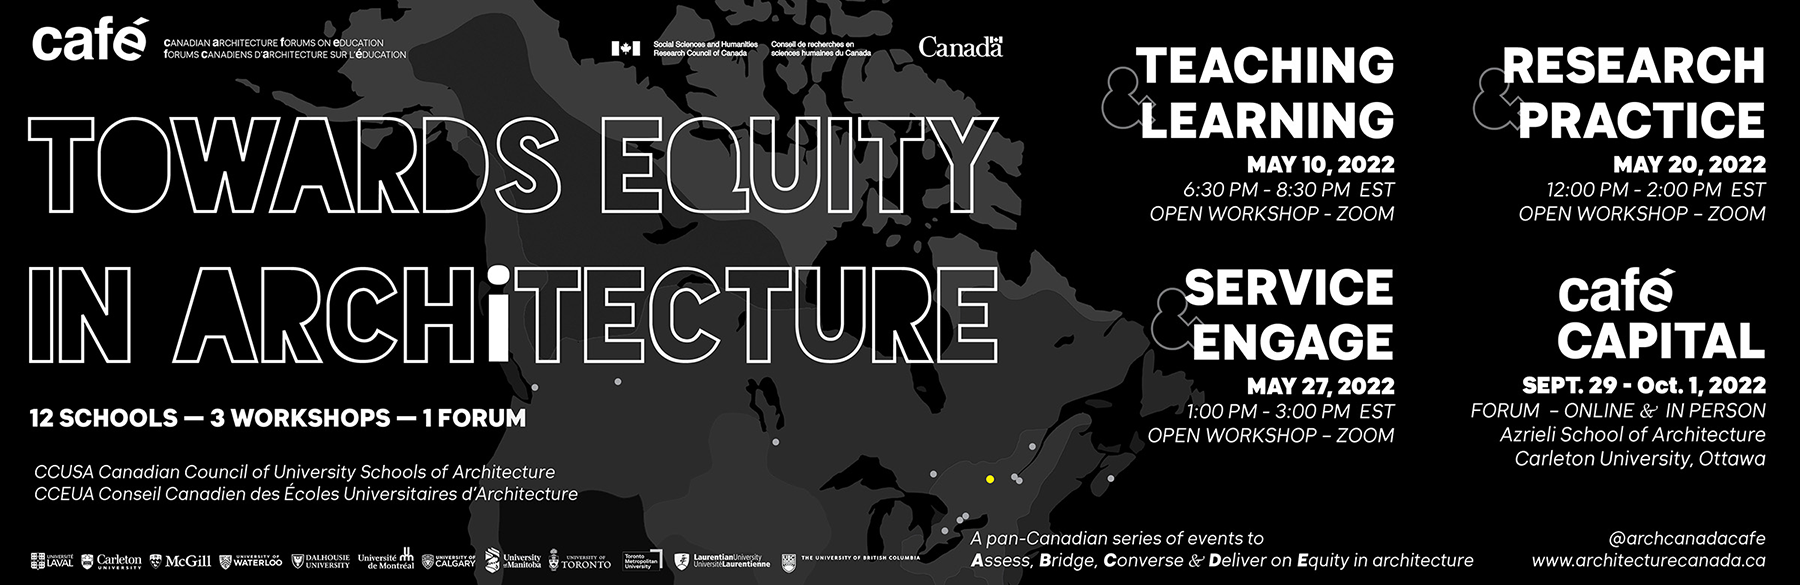 Towards Equity in Architecture Event Poster